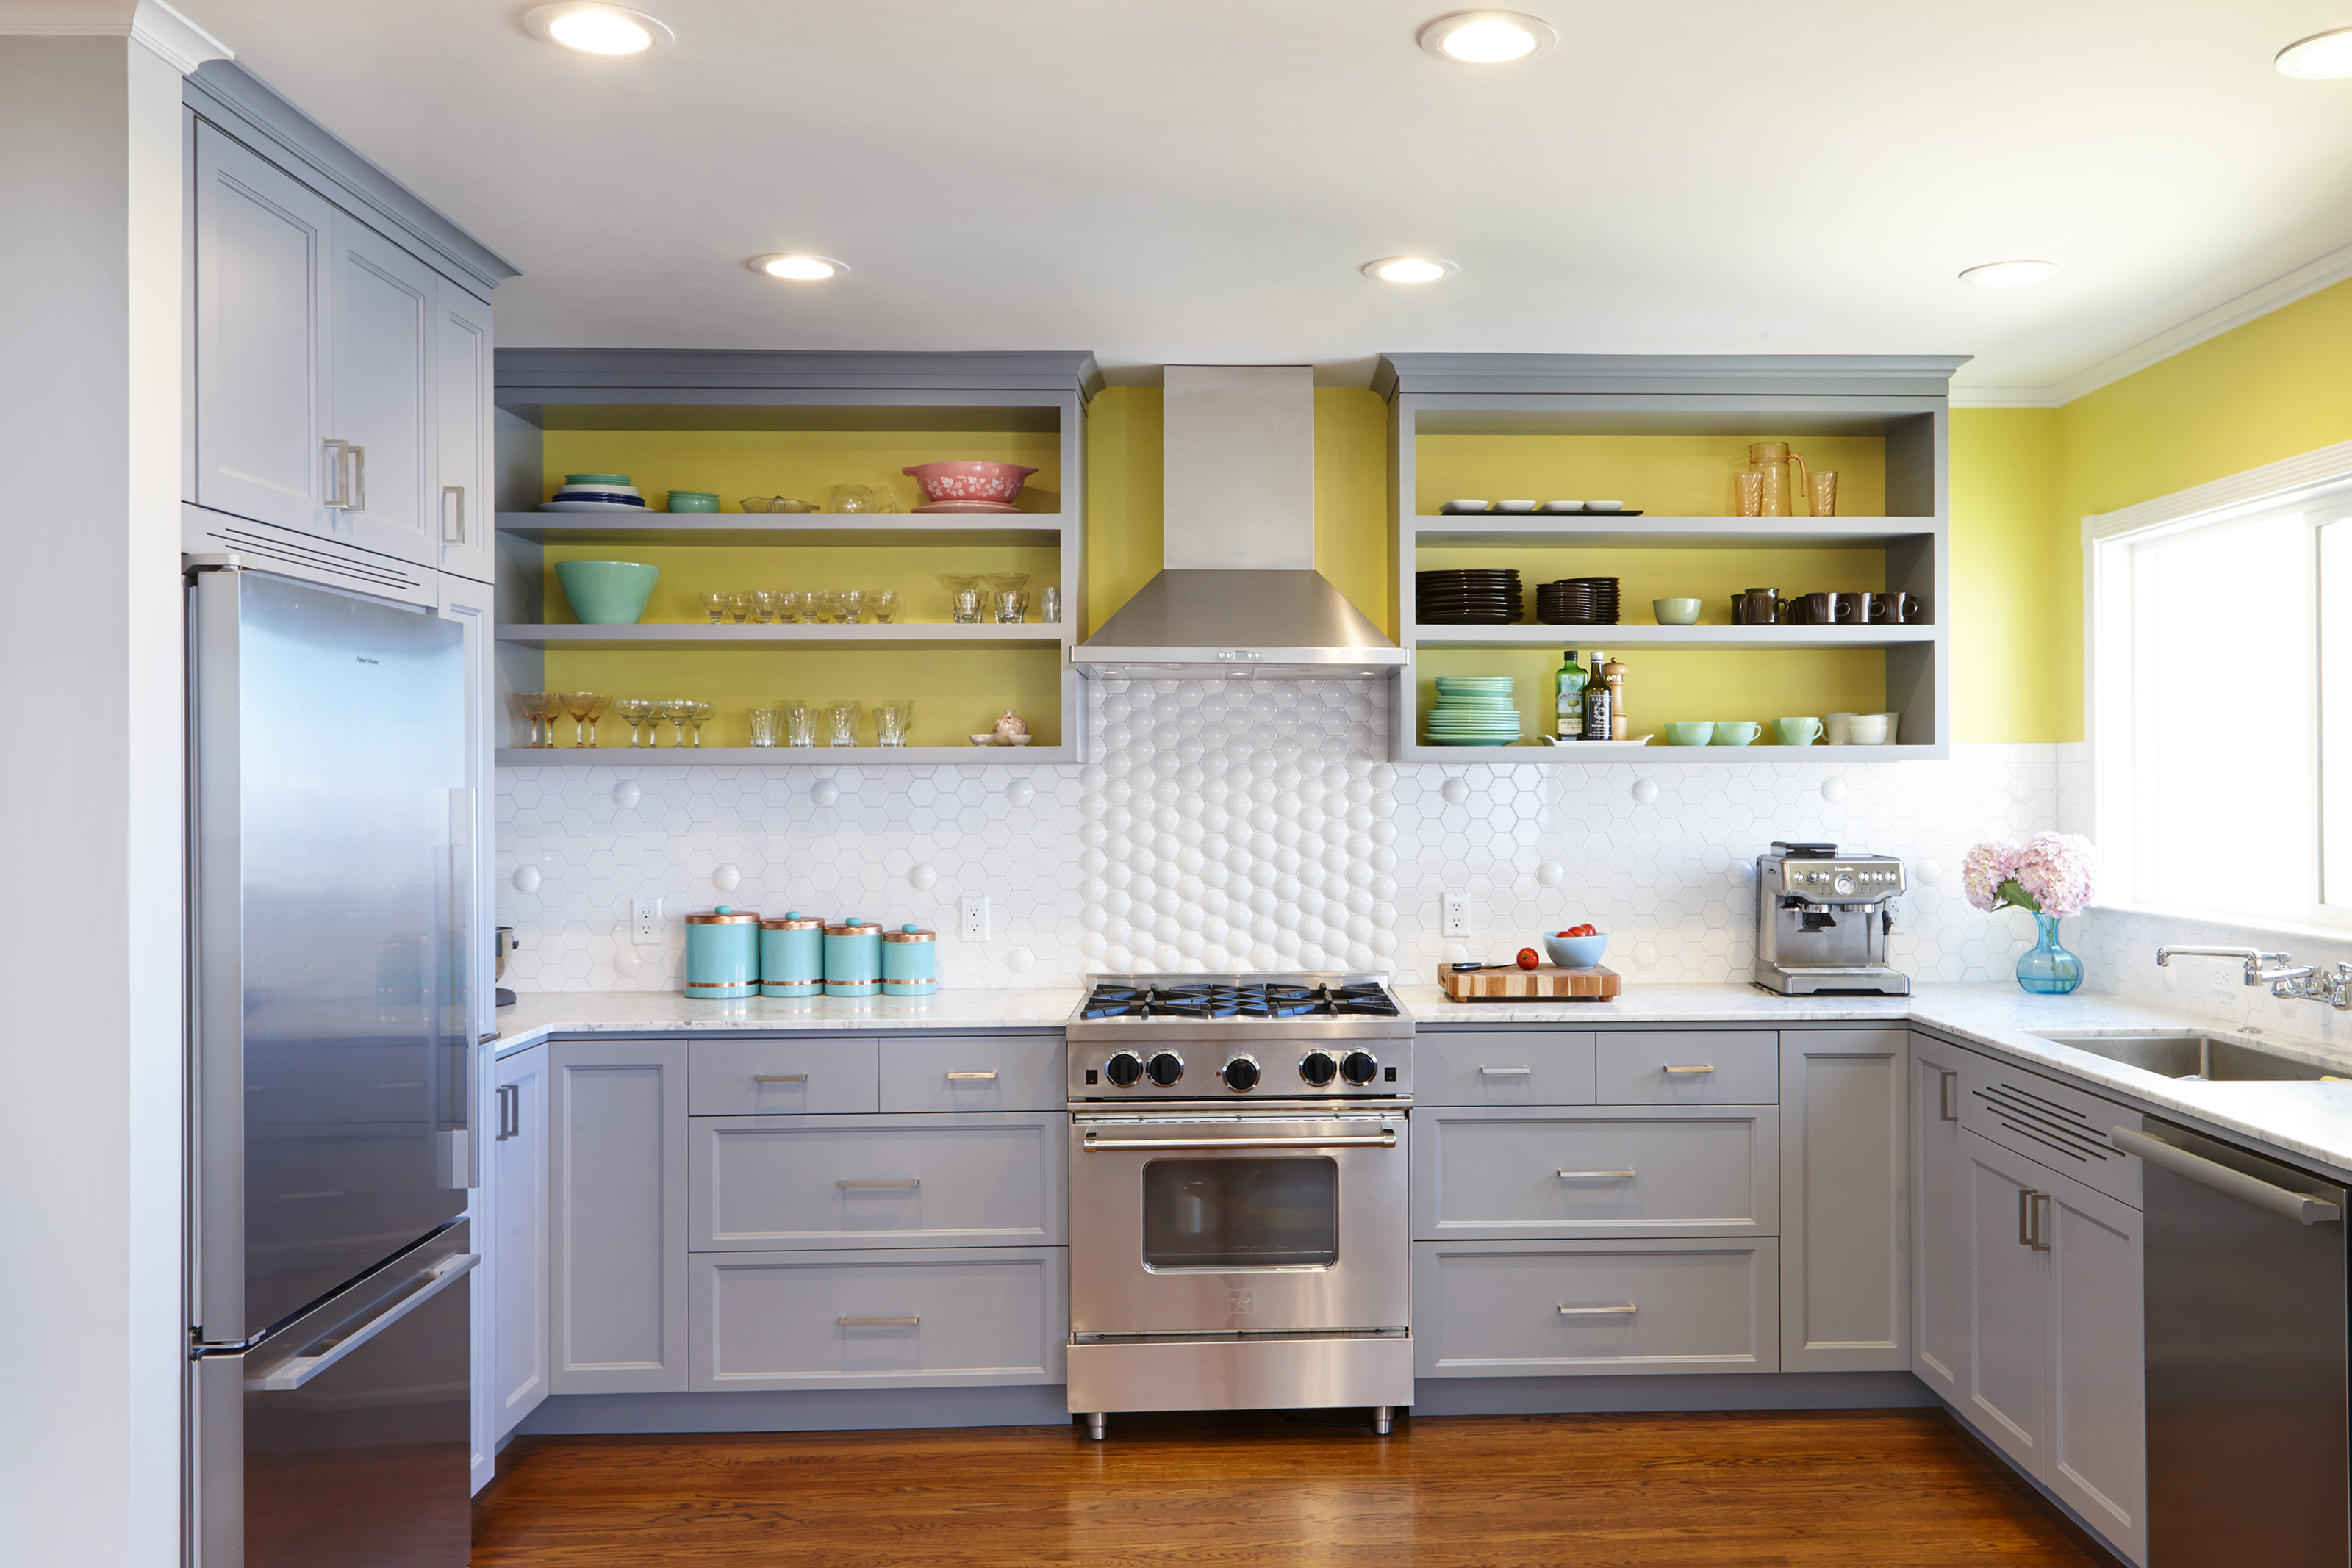 best paint for kitchen wall near stove